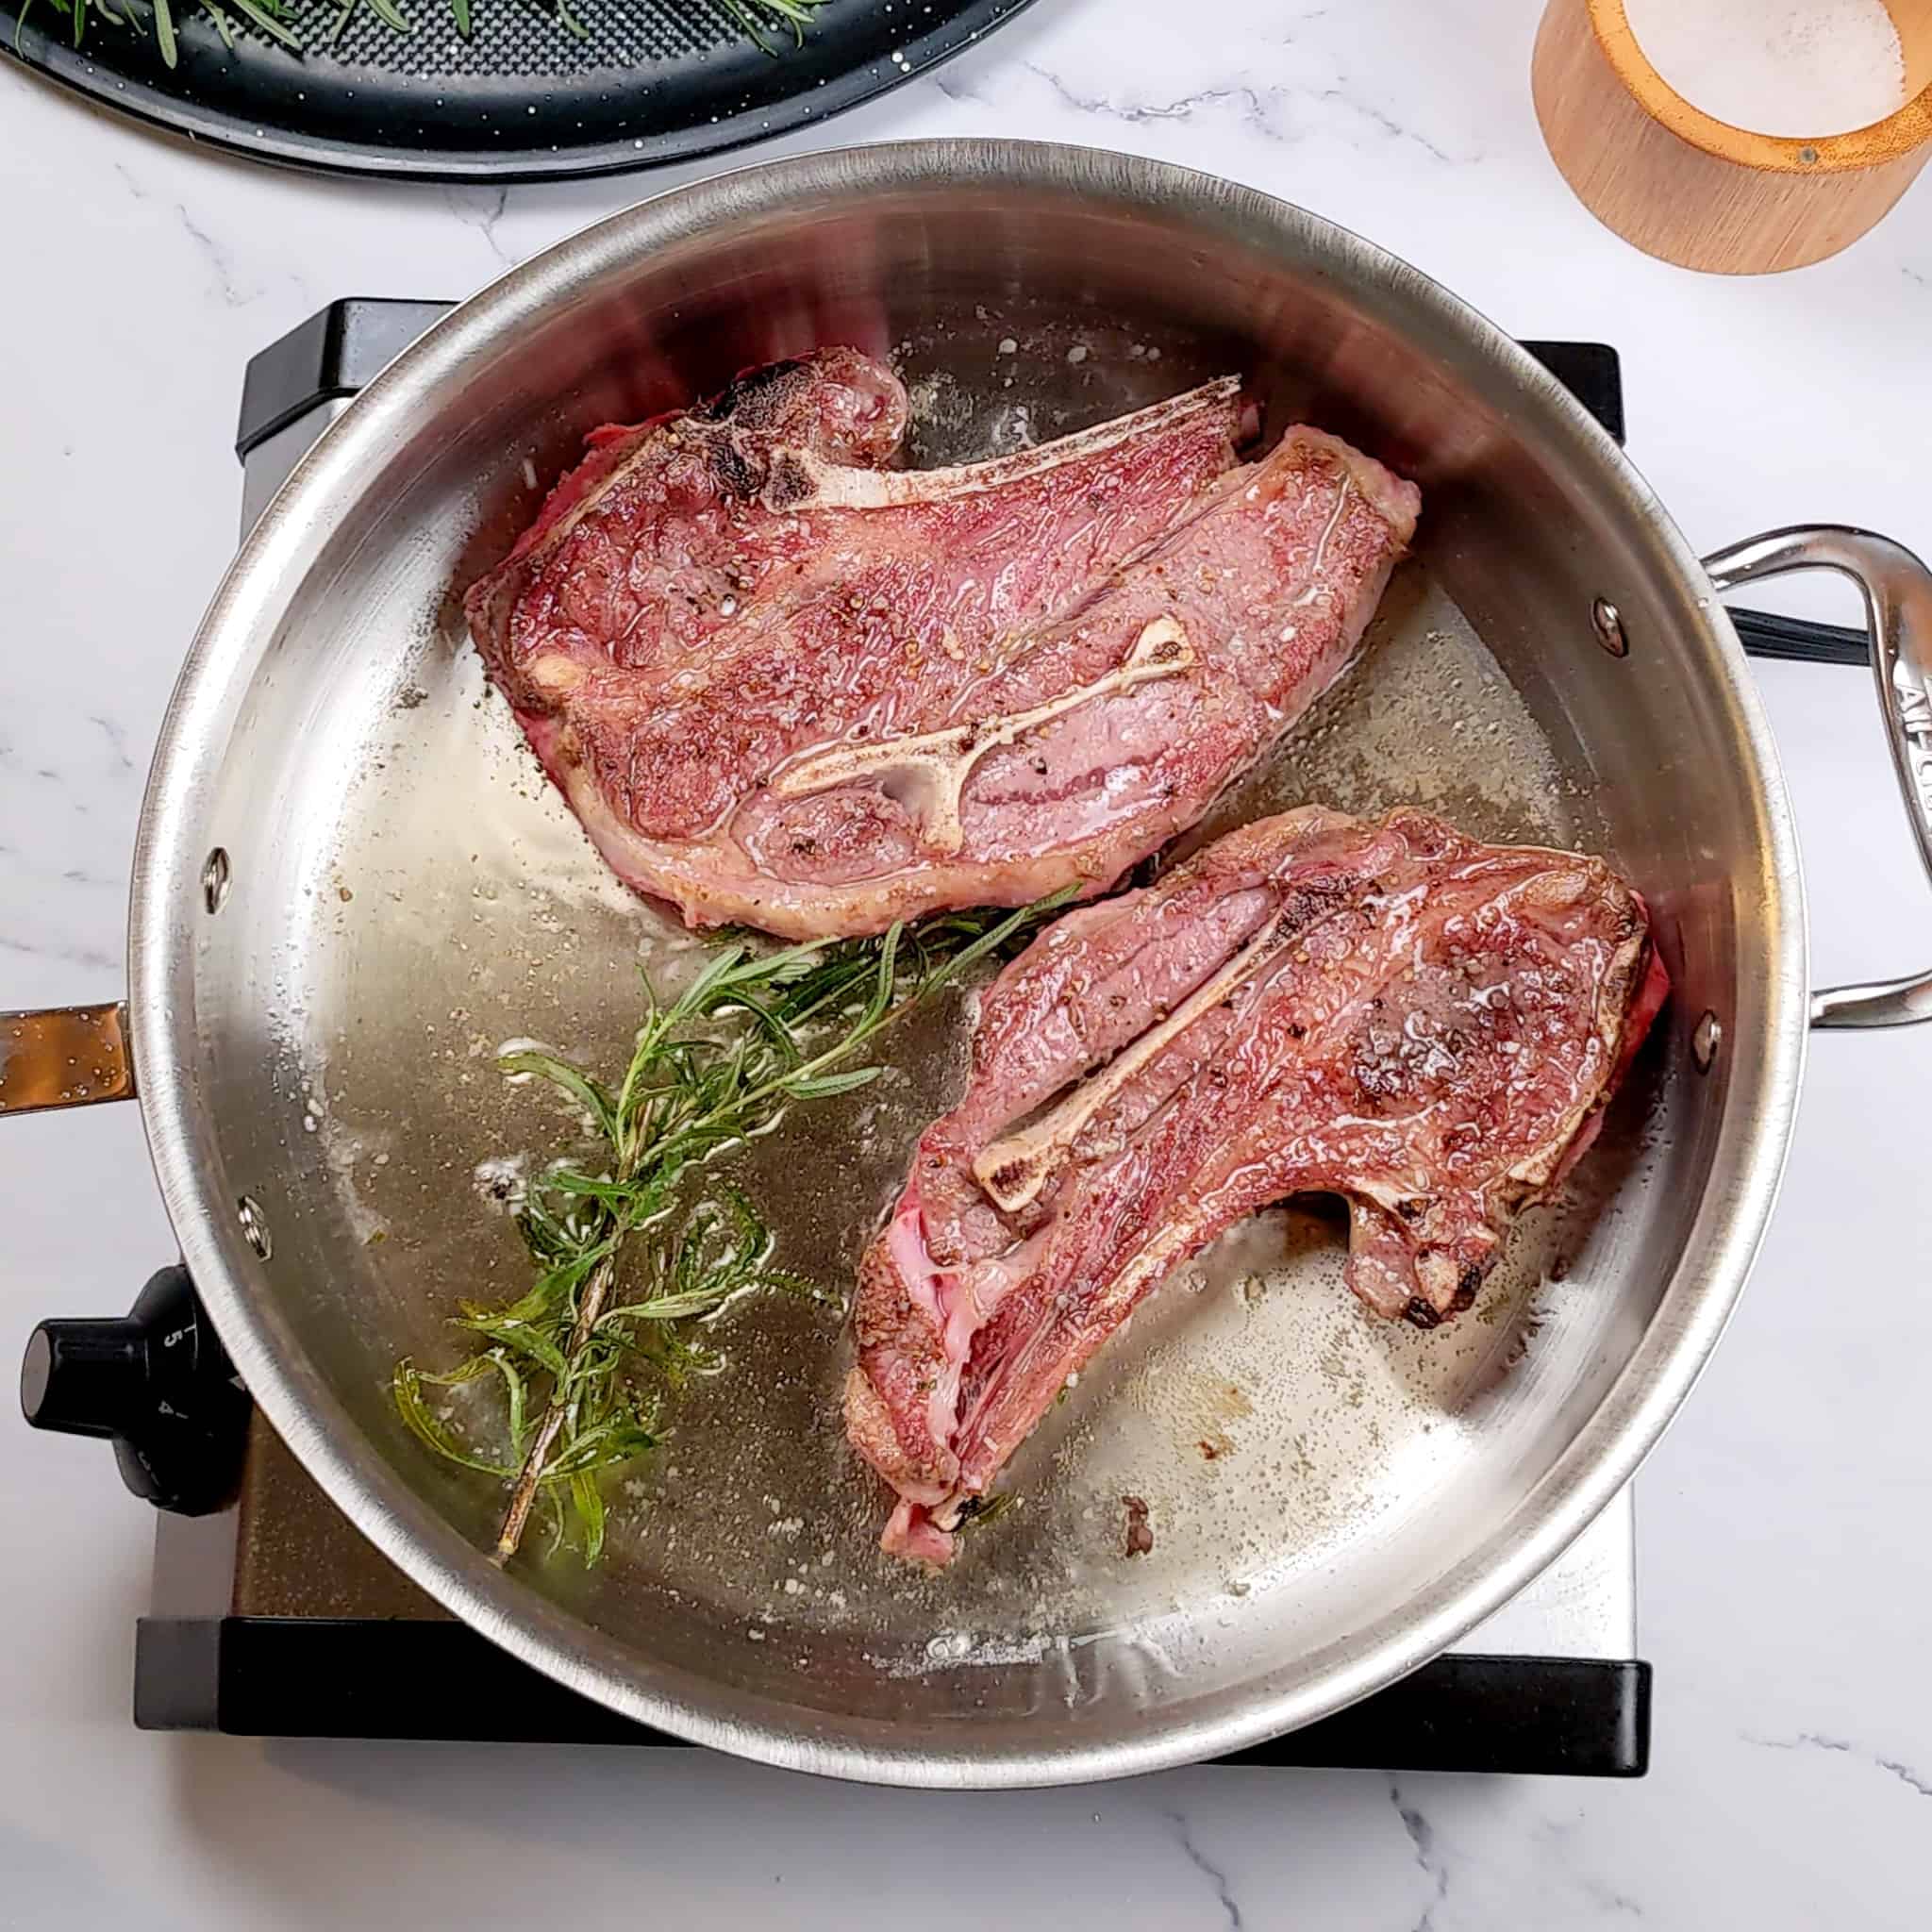 seared lamb shoulder chops in an all-clad stainless steel saute pan for the Quick and Easy Lean Baharat Spiced Bean and Lamb Stew recipe.